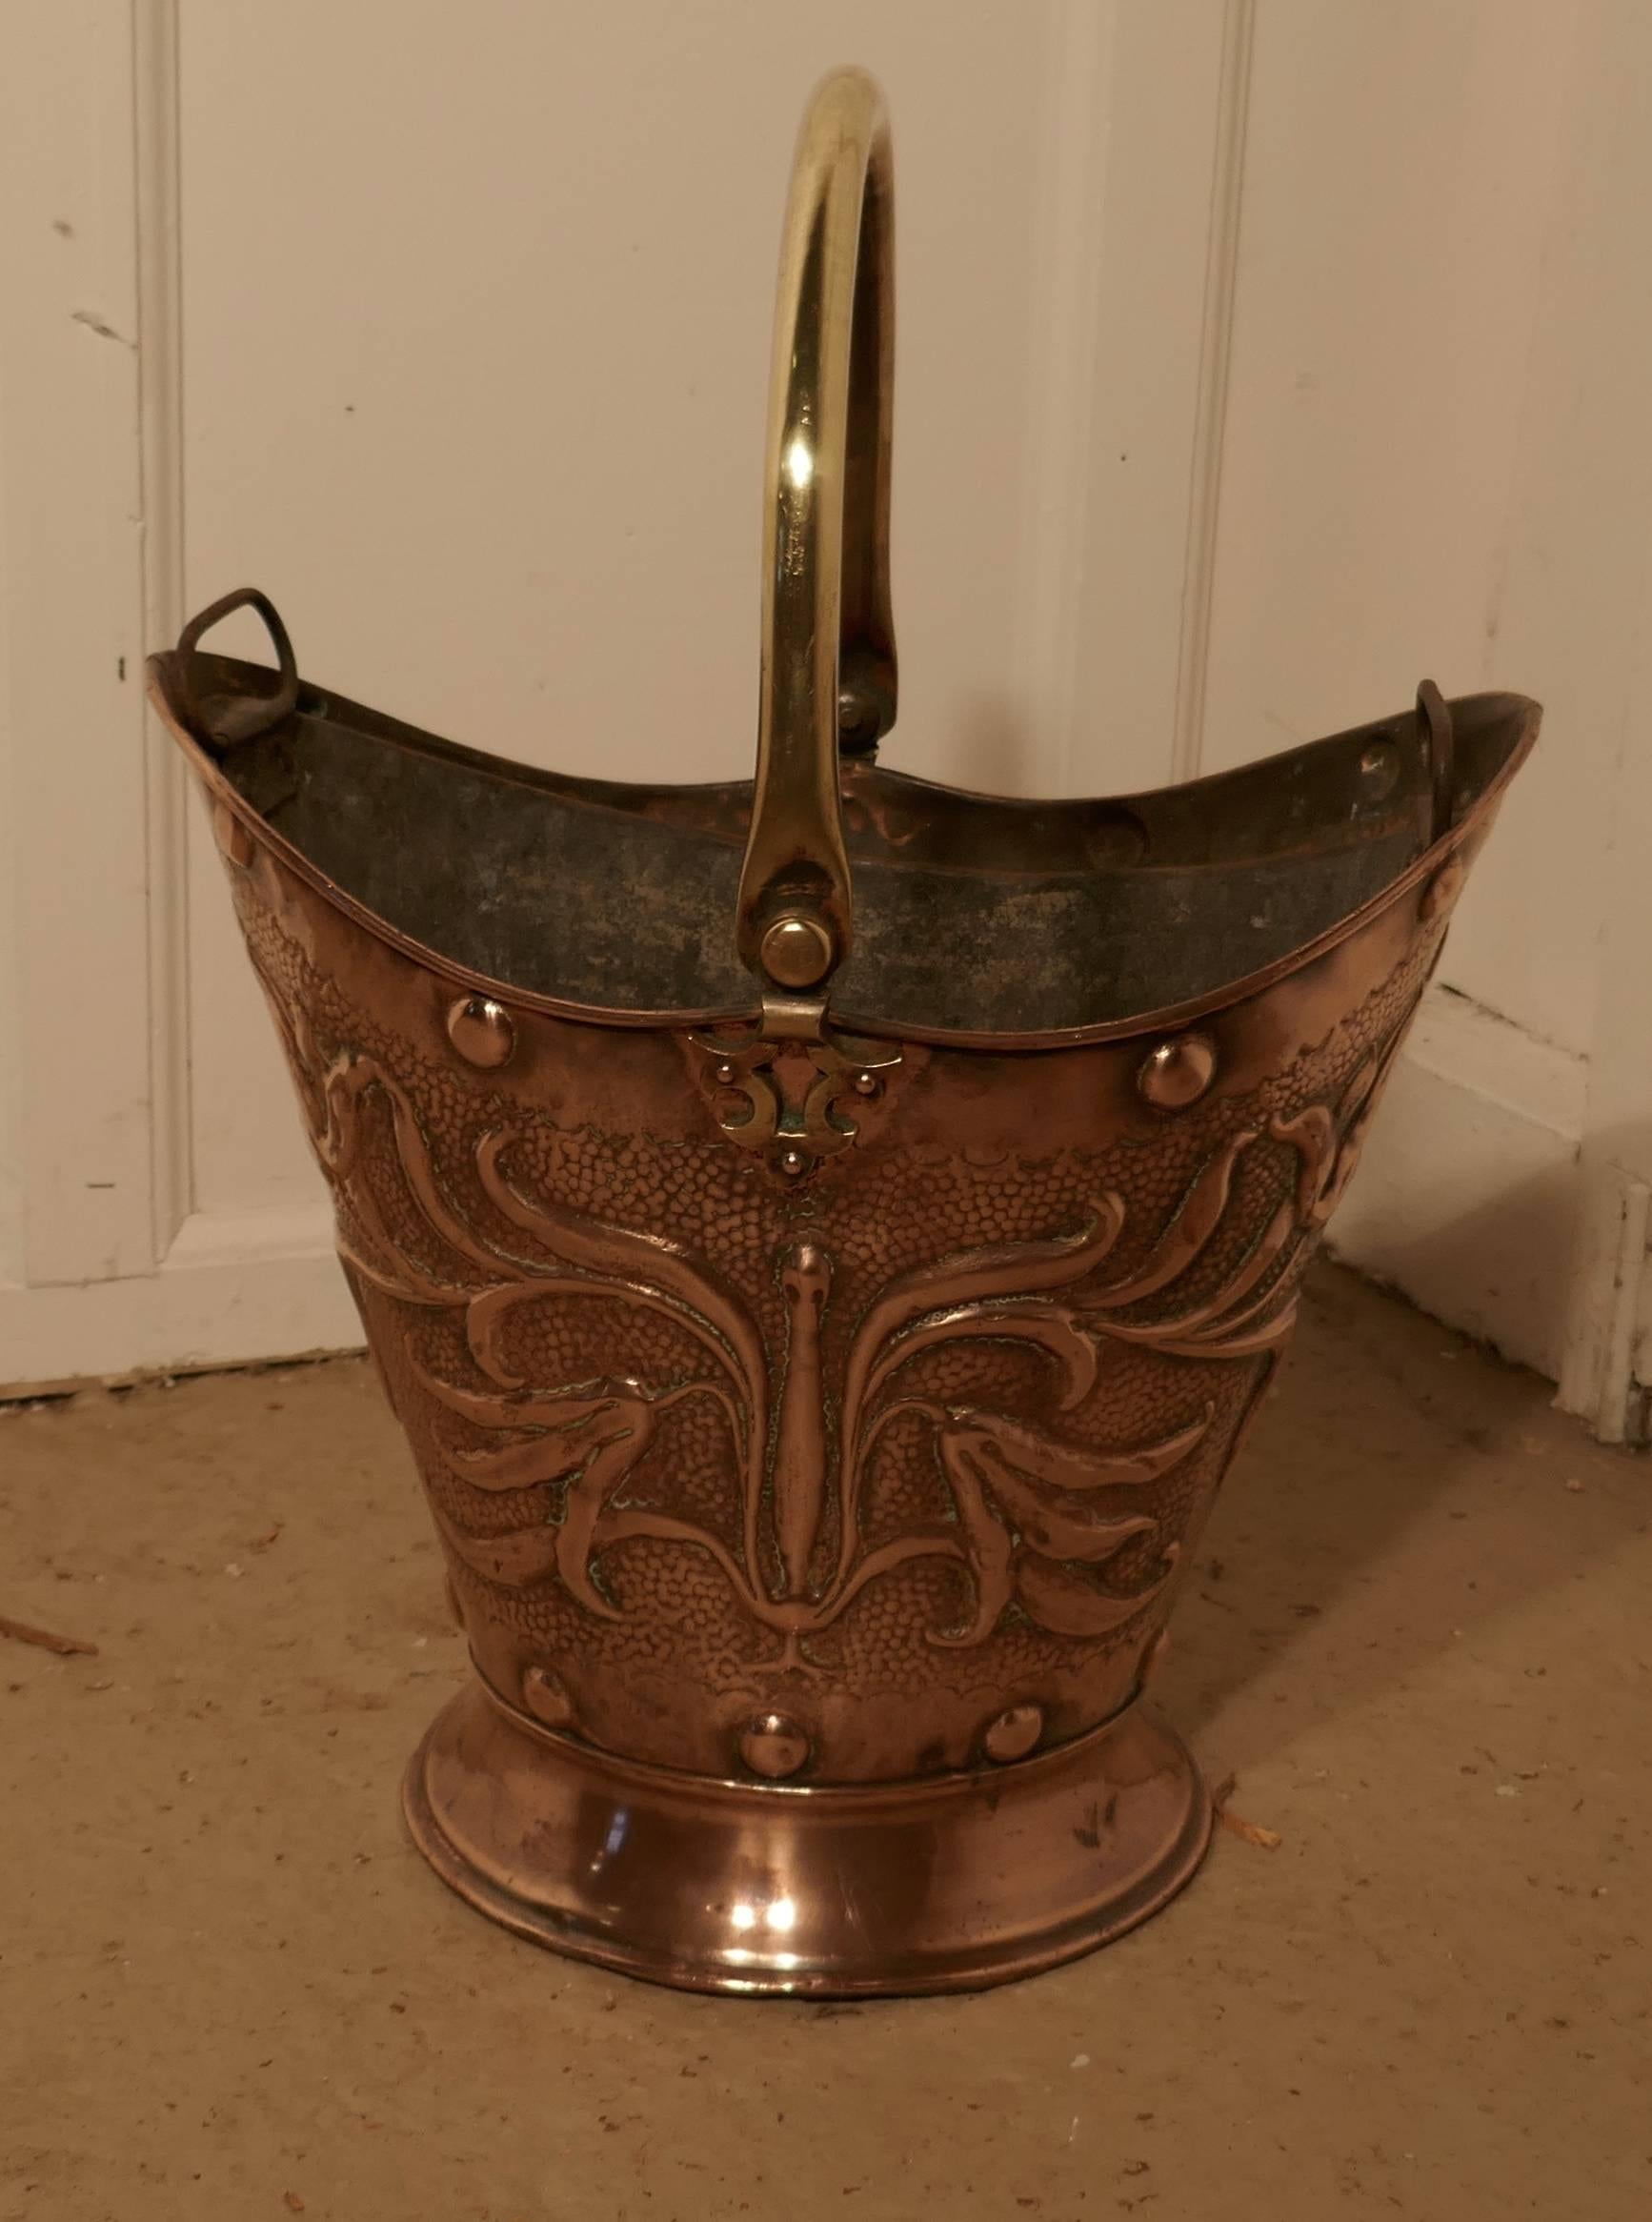 An Art Nouveau embossed copper helmet coal scuttle with liner

This bucket is a very attractive oval shape, it is made in beaten copper with a brass handle, it comes complete with its two handled liner 
The scuttle is in very good used condition,